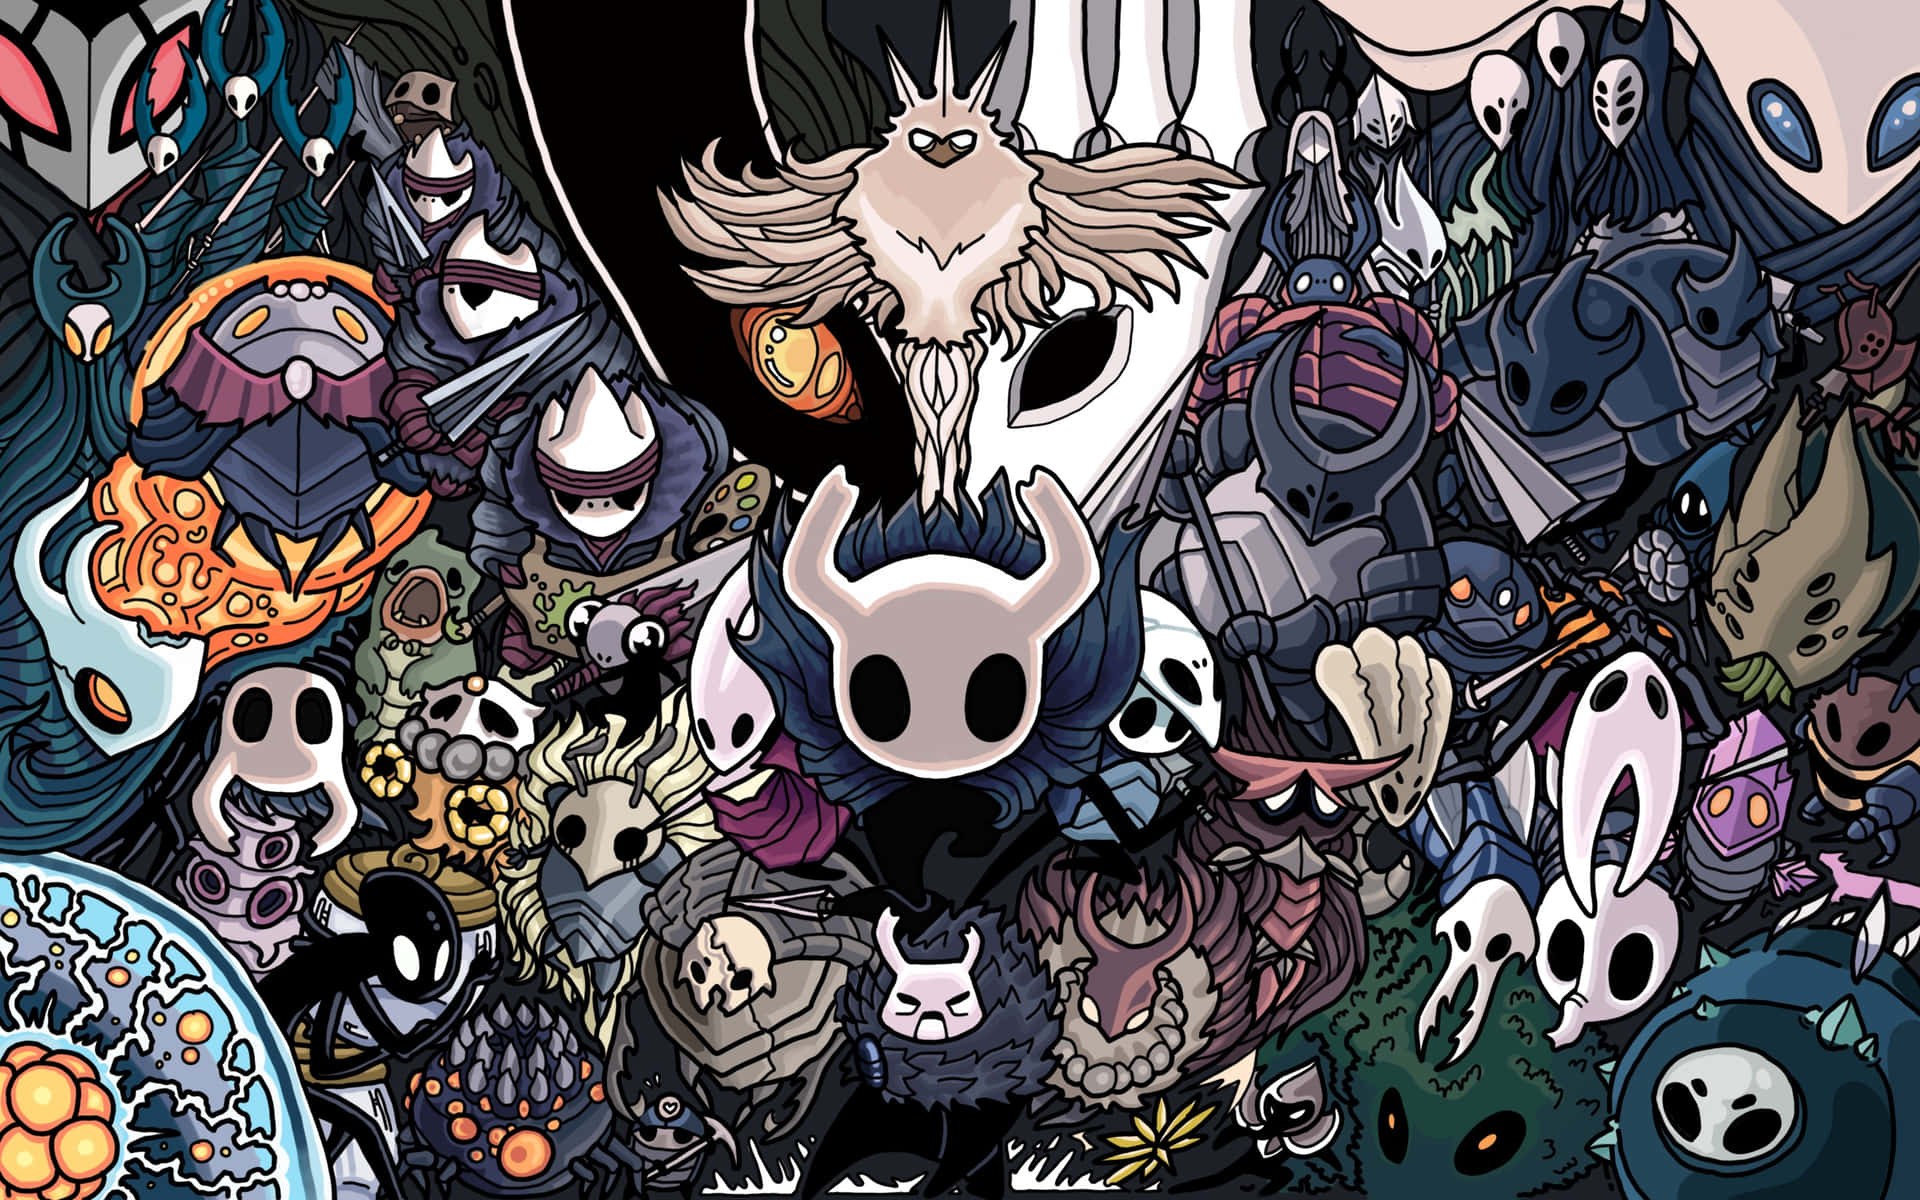 Uncover the secrets of Hallownest in Hollow Knight